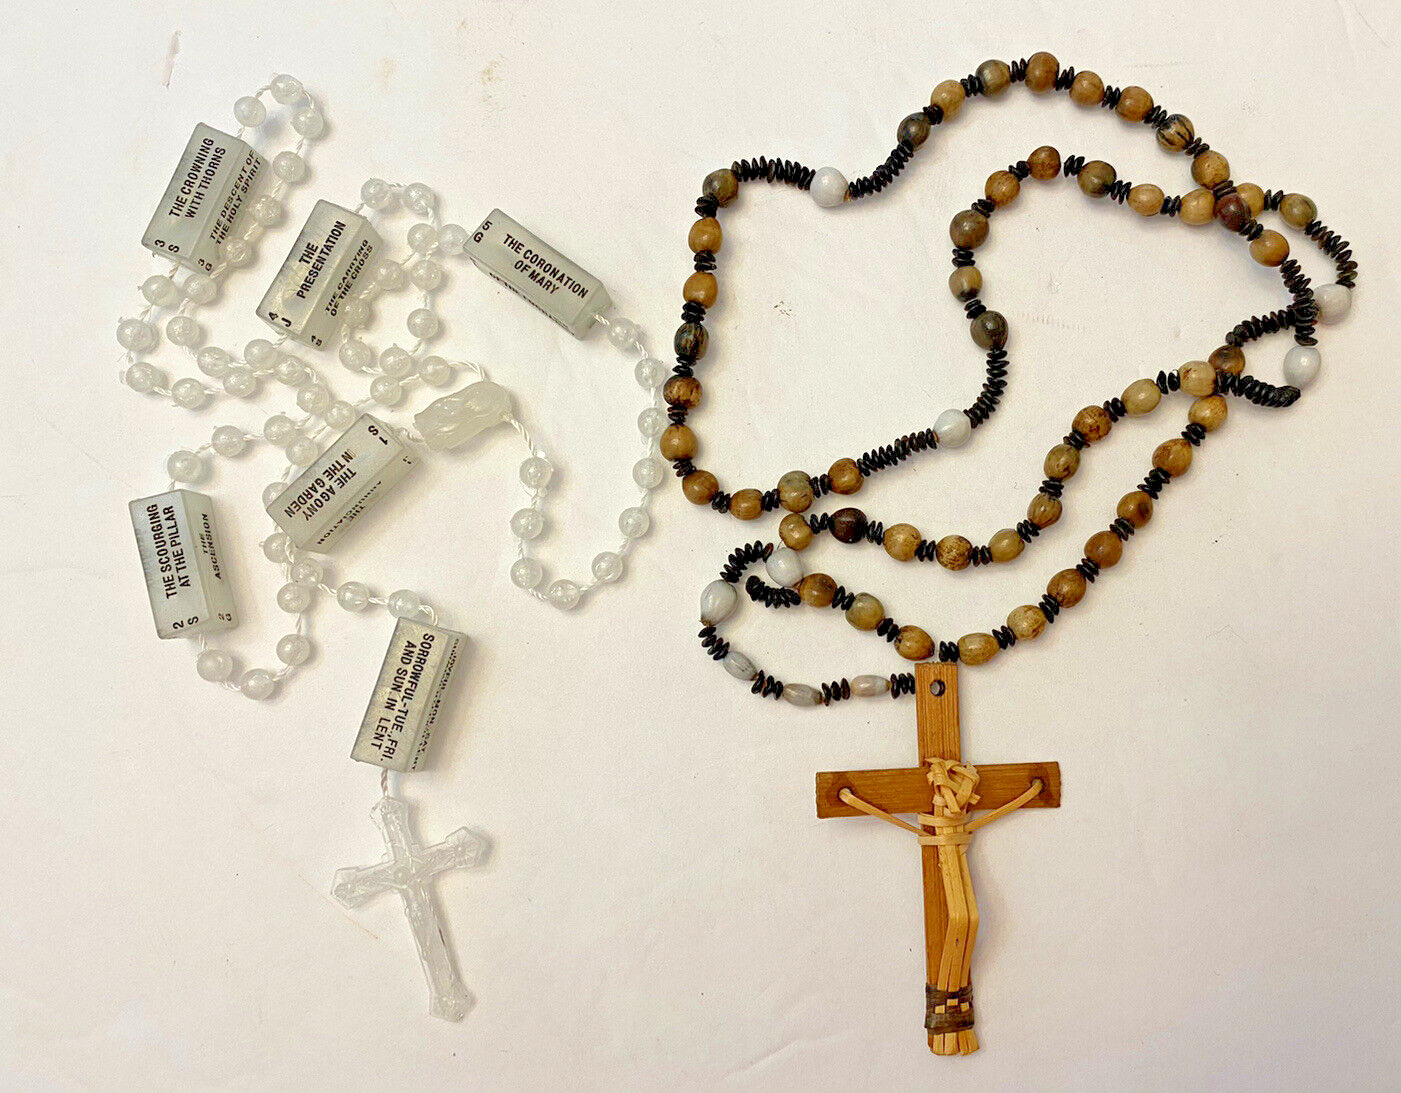 Lot of Two Unique Catholic Rosaries Seed Beads Glow-in-the-Dark with Mysteries